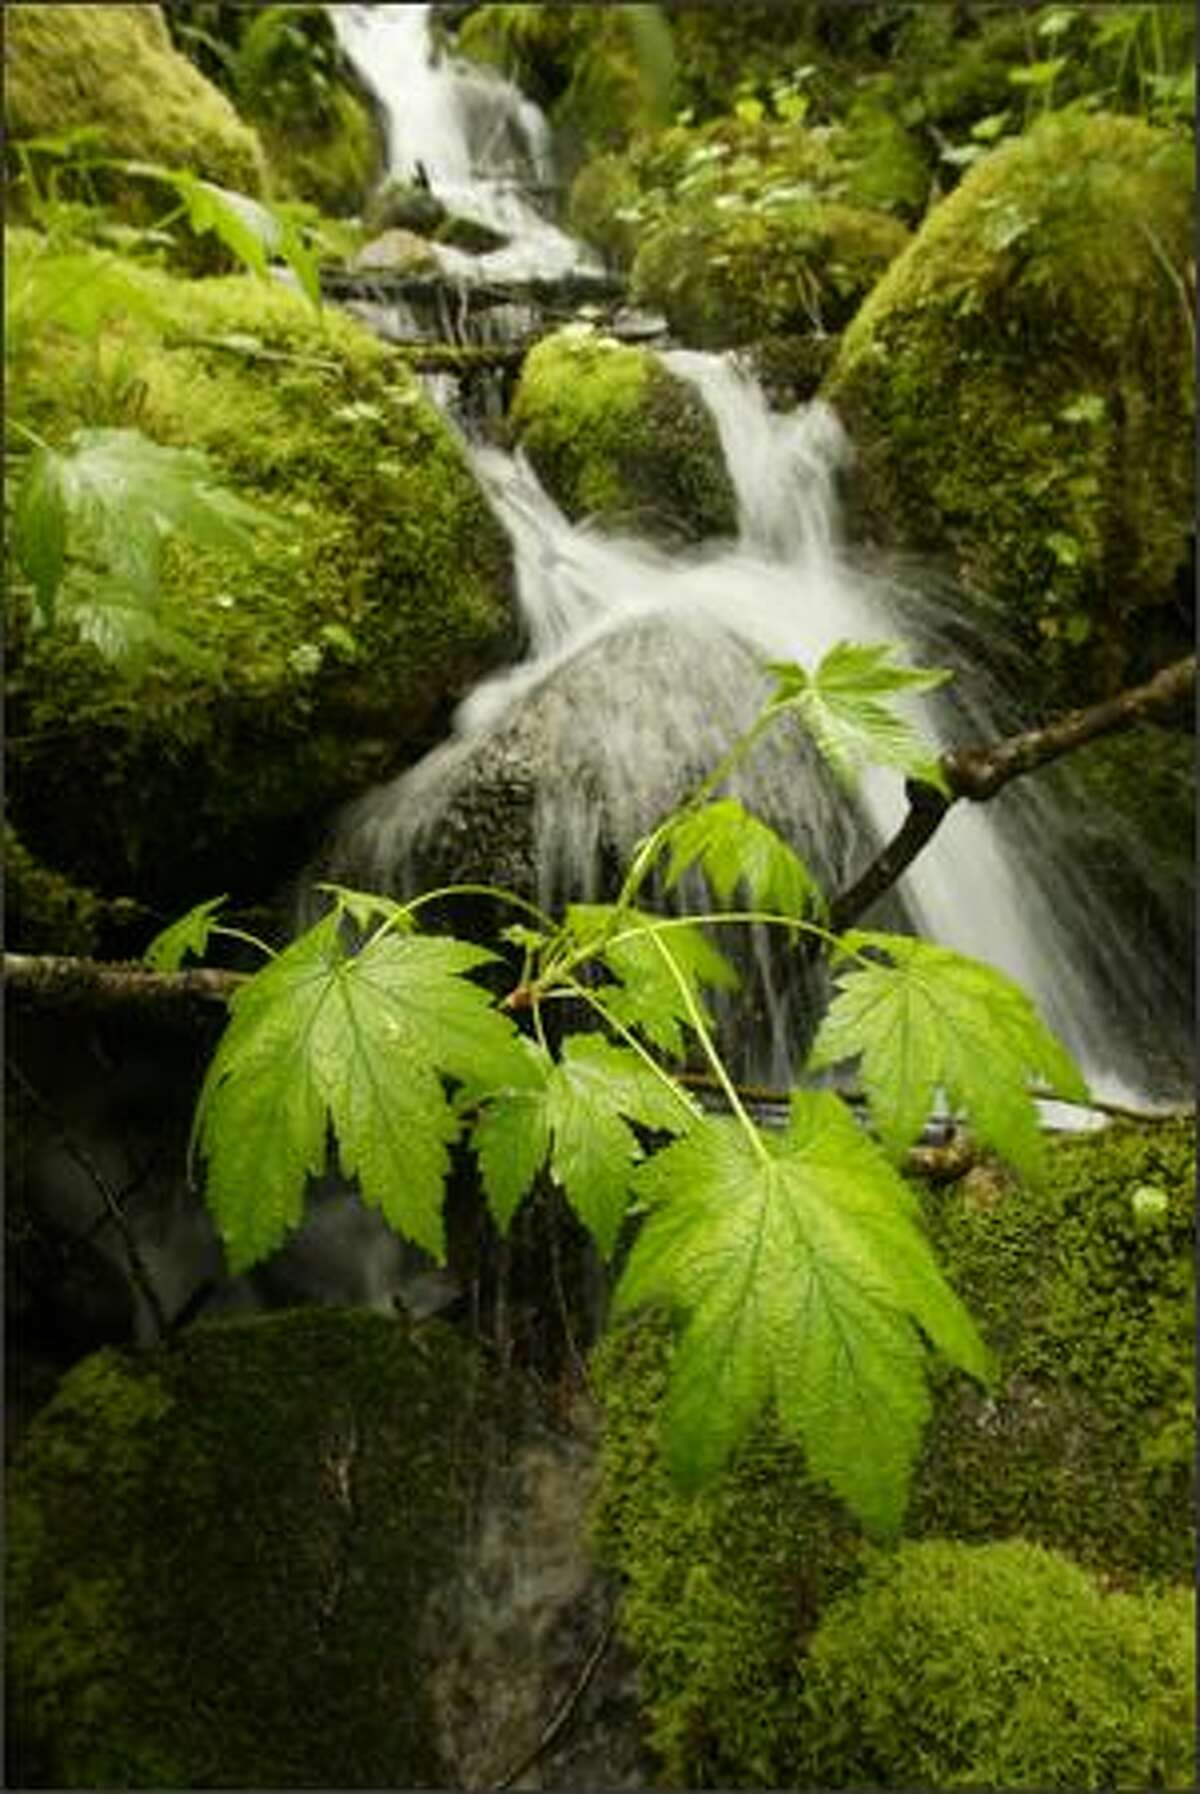 A snow melt creek flows into the Skagit River, over moss covered rocks and under wet leaves, in Washington state's North Cascades. May 18, 2008.